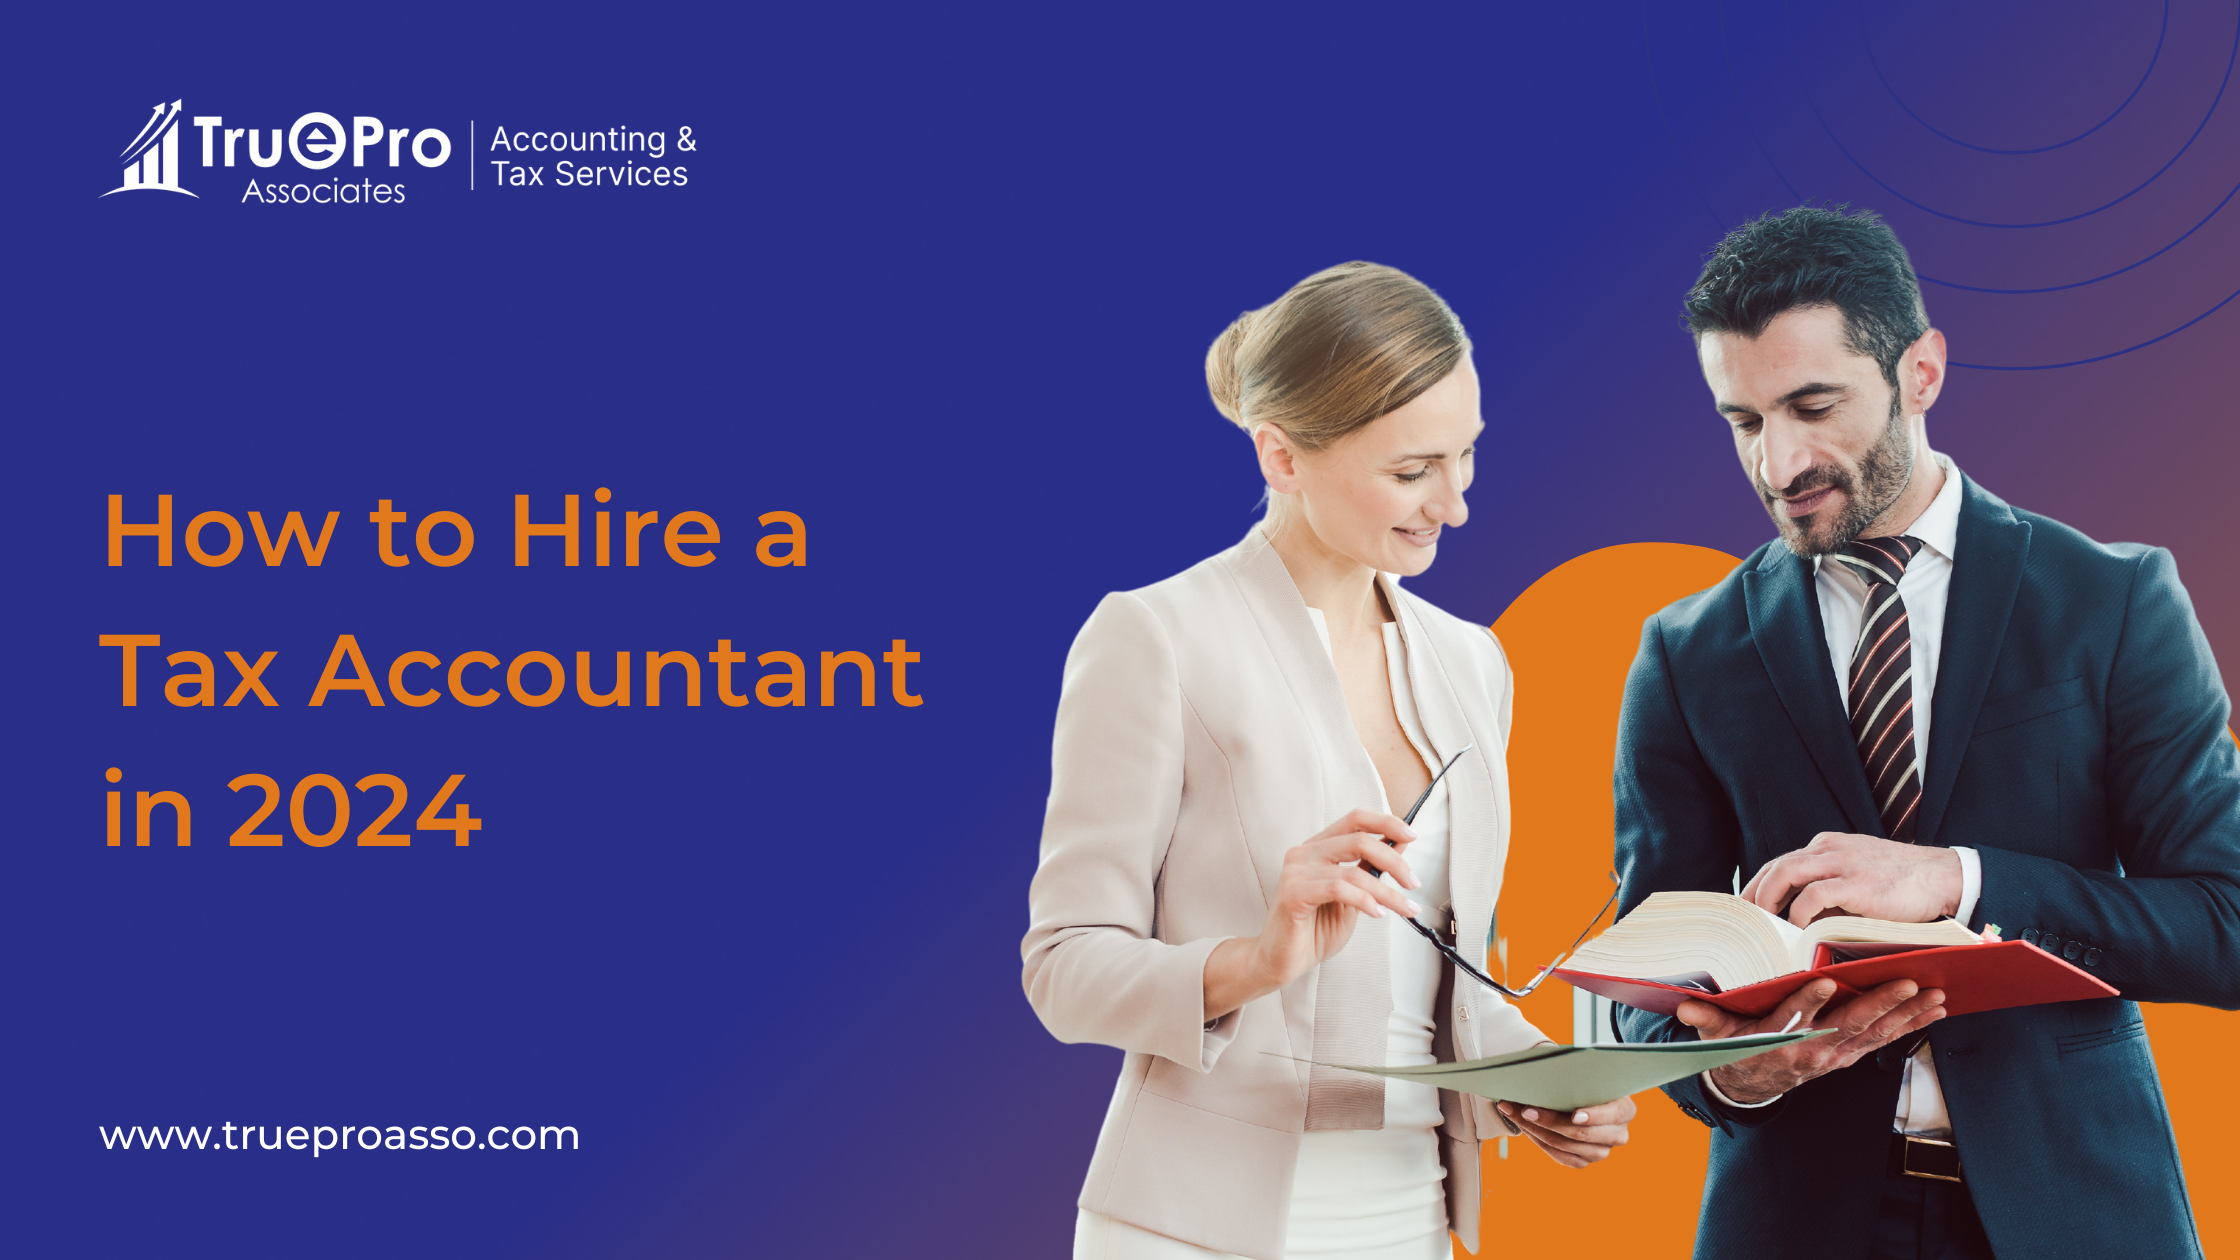 How to hire tax accountant in 2024